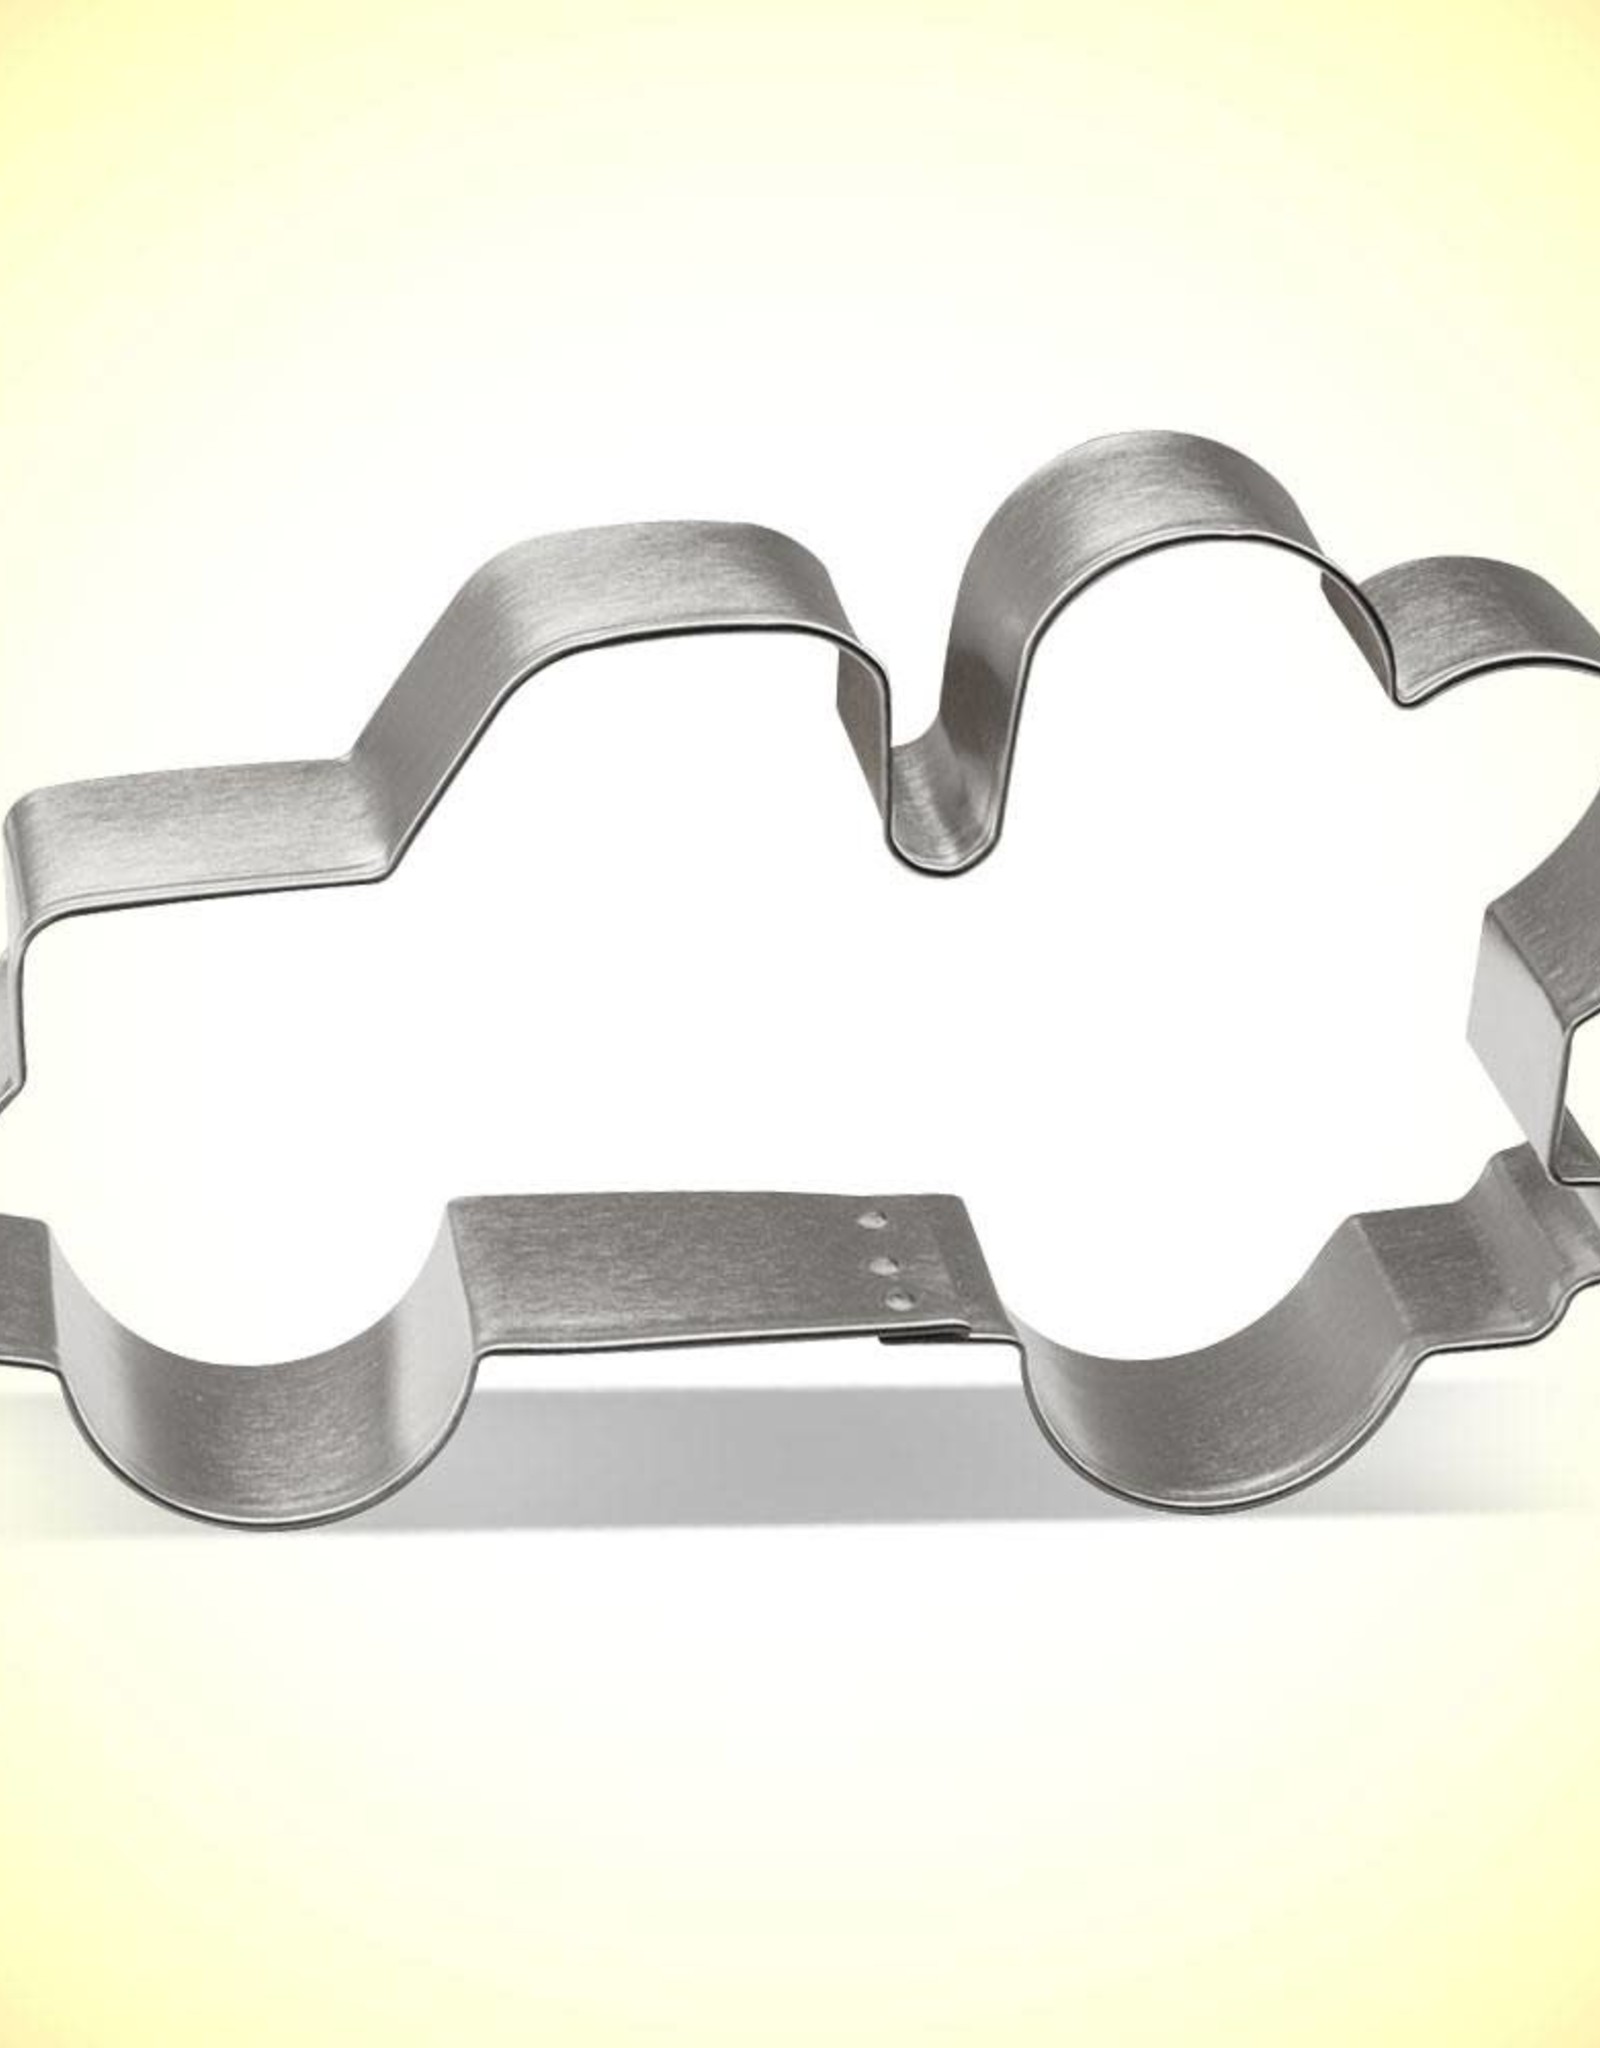 Truck with Heart Cookie Cutter (5")